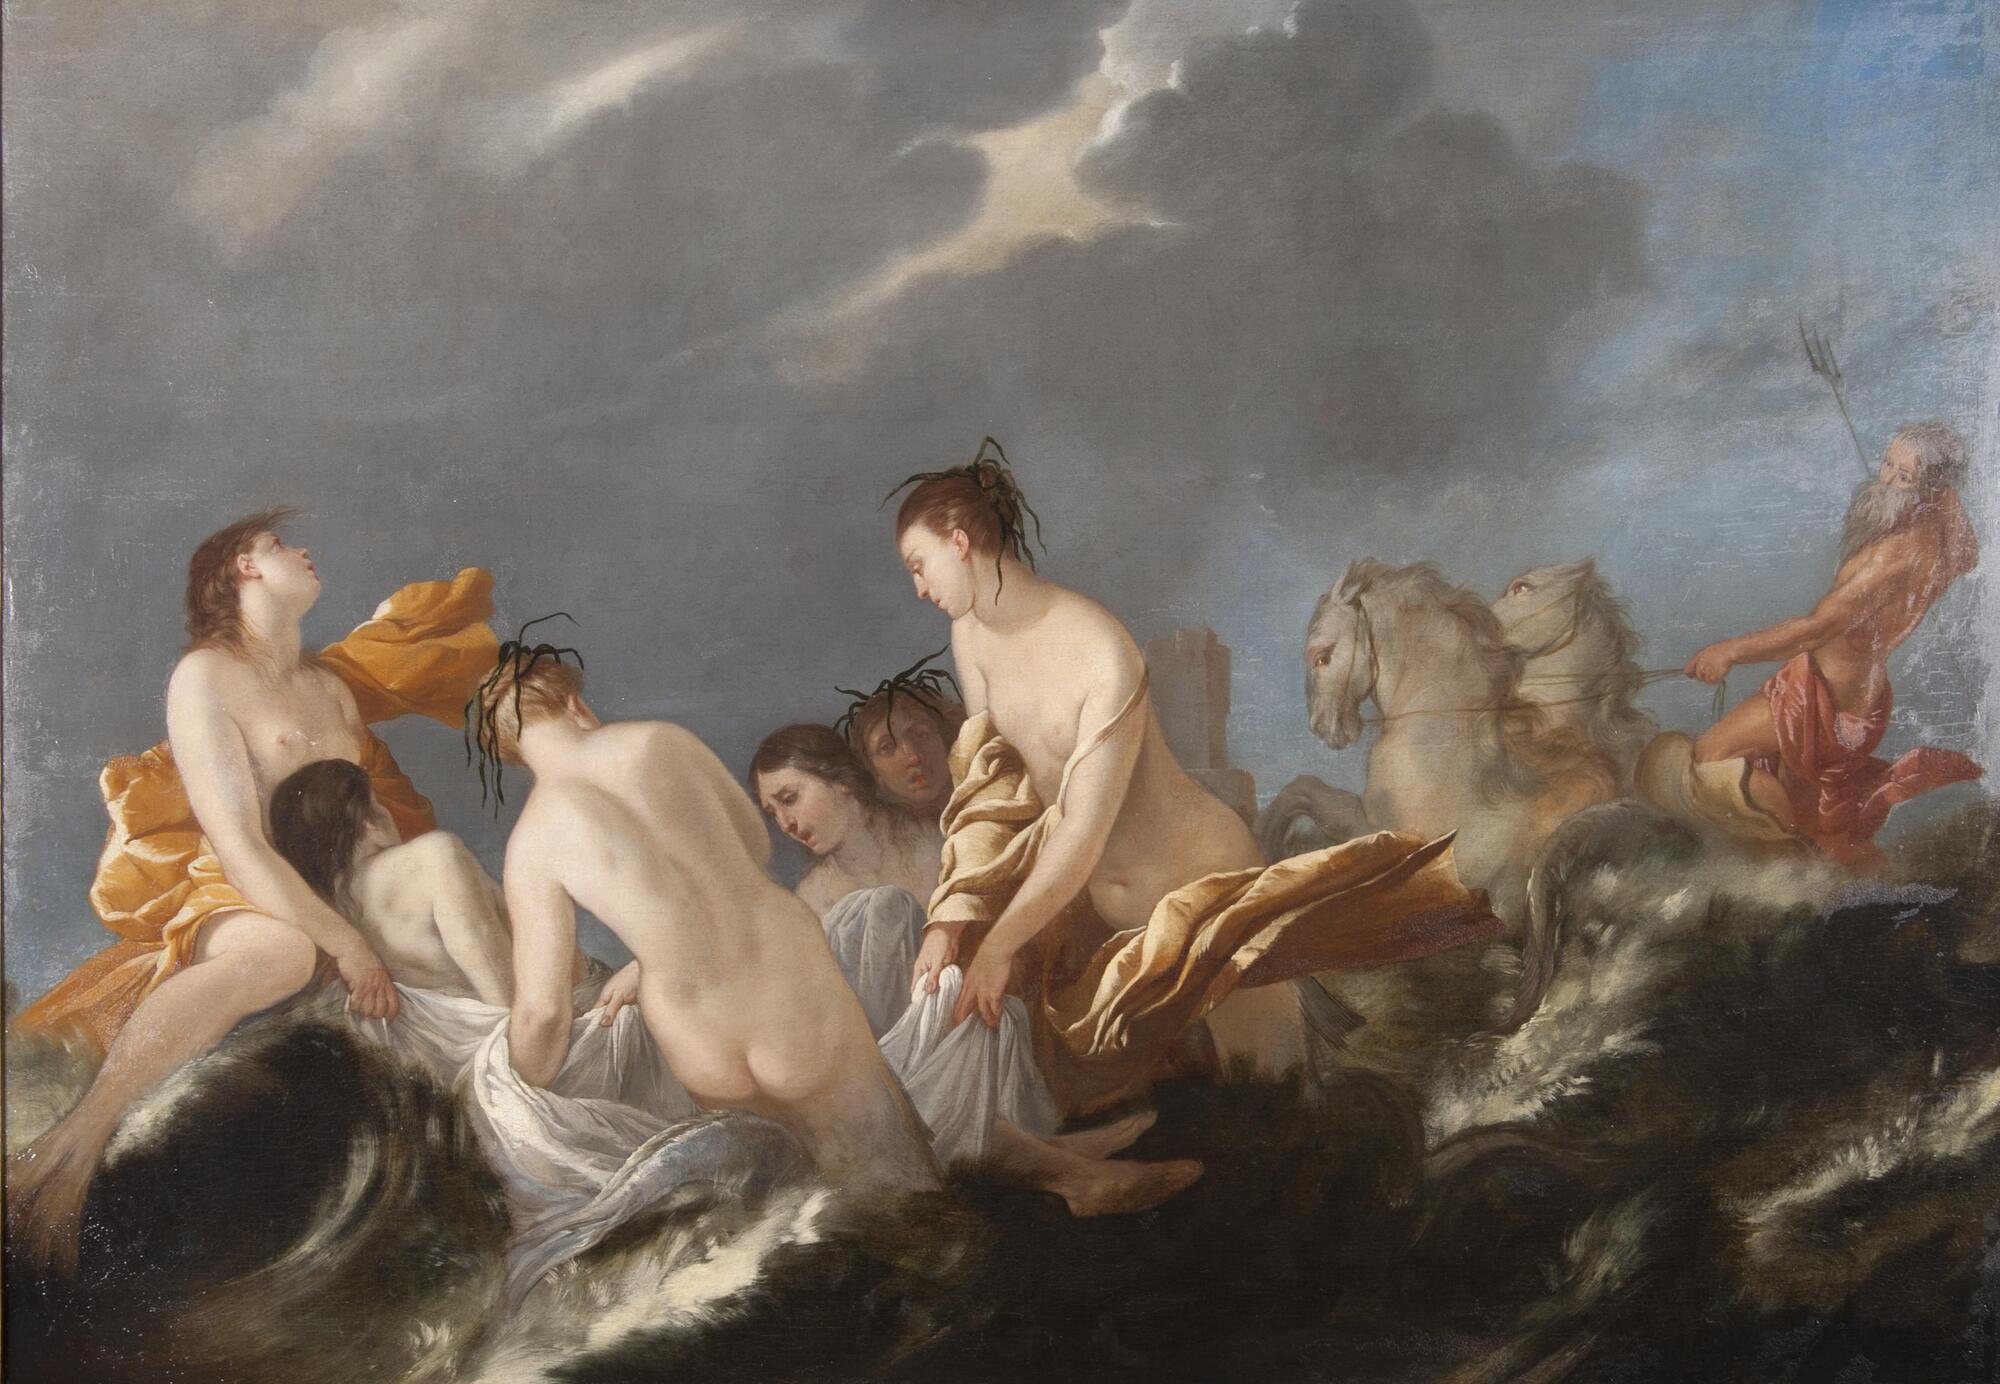 In dark turbulent waters under a stormy sky four nude sea nymphs support the body of a long-haired man between them on a white shroud. The face of a man with kelp in his hair appears between two of the nymphs.  On the right a bearded man with a trident in his right hand rides in a chariot fashioned from a seashell and pulled by two fished-tailed horses or hippocampi. Just visible in the distance behind the back of the rightmost nymph, a lofty tower rises above the waves.